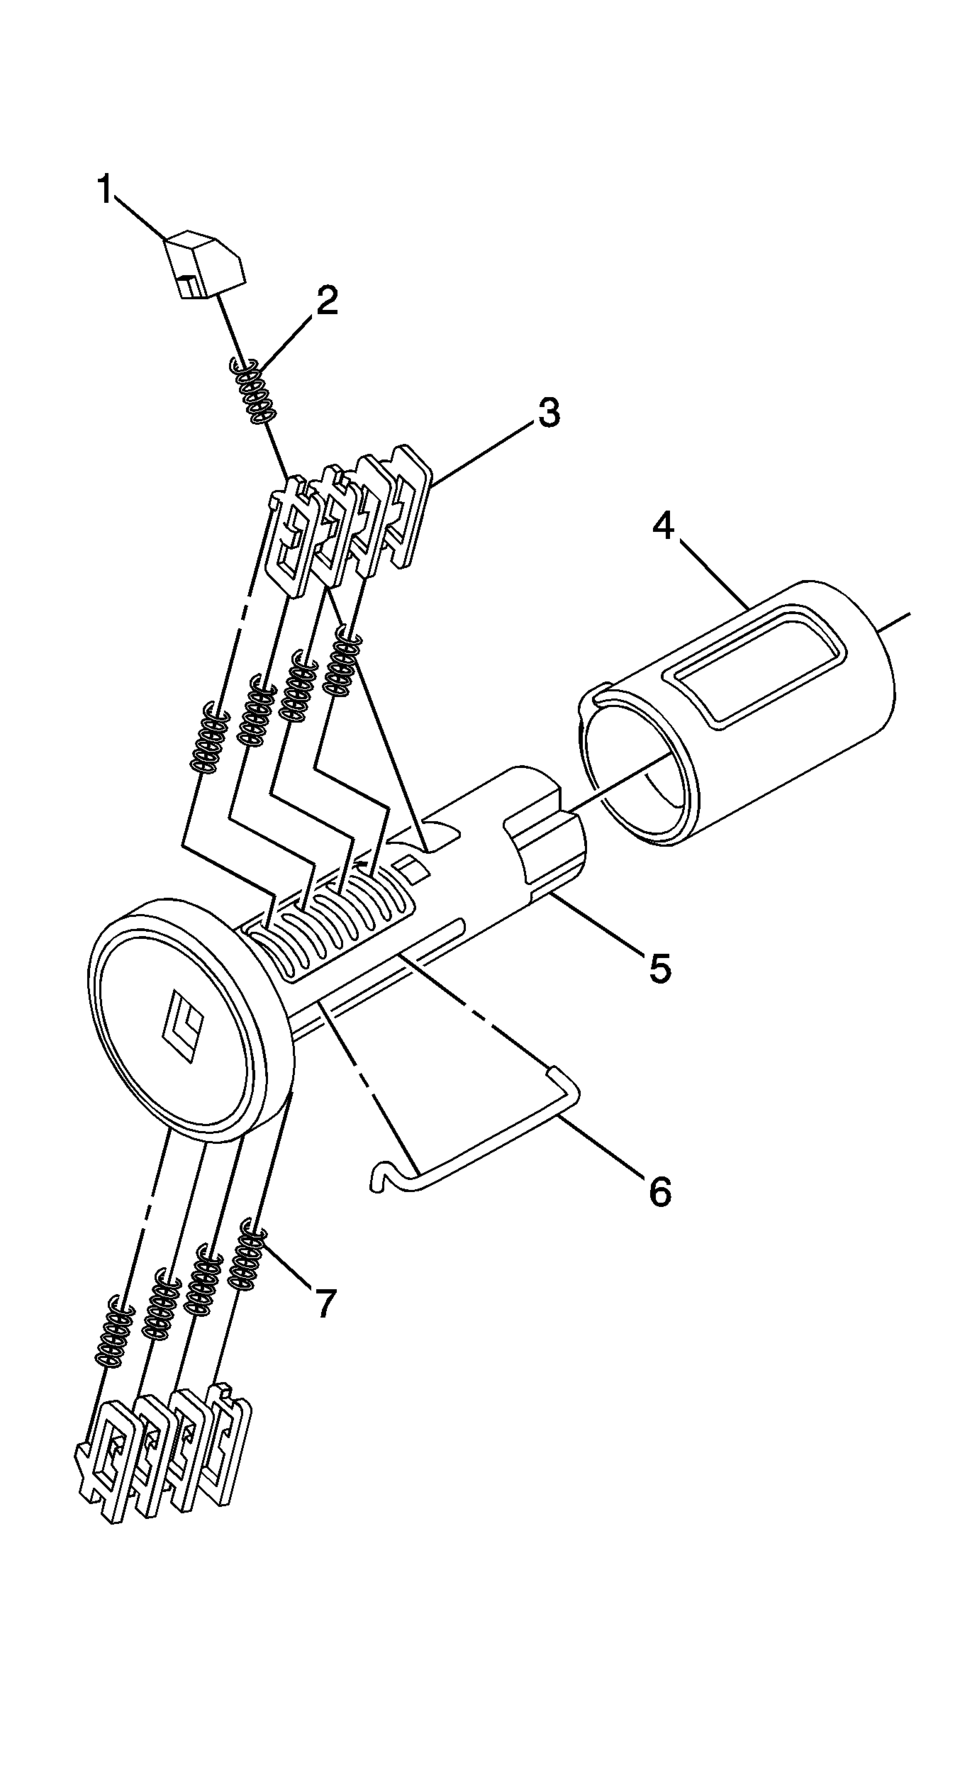 The ignition lock cylinder uses 8 key cut positions, 1–8. The ignition cylinder